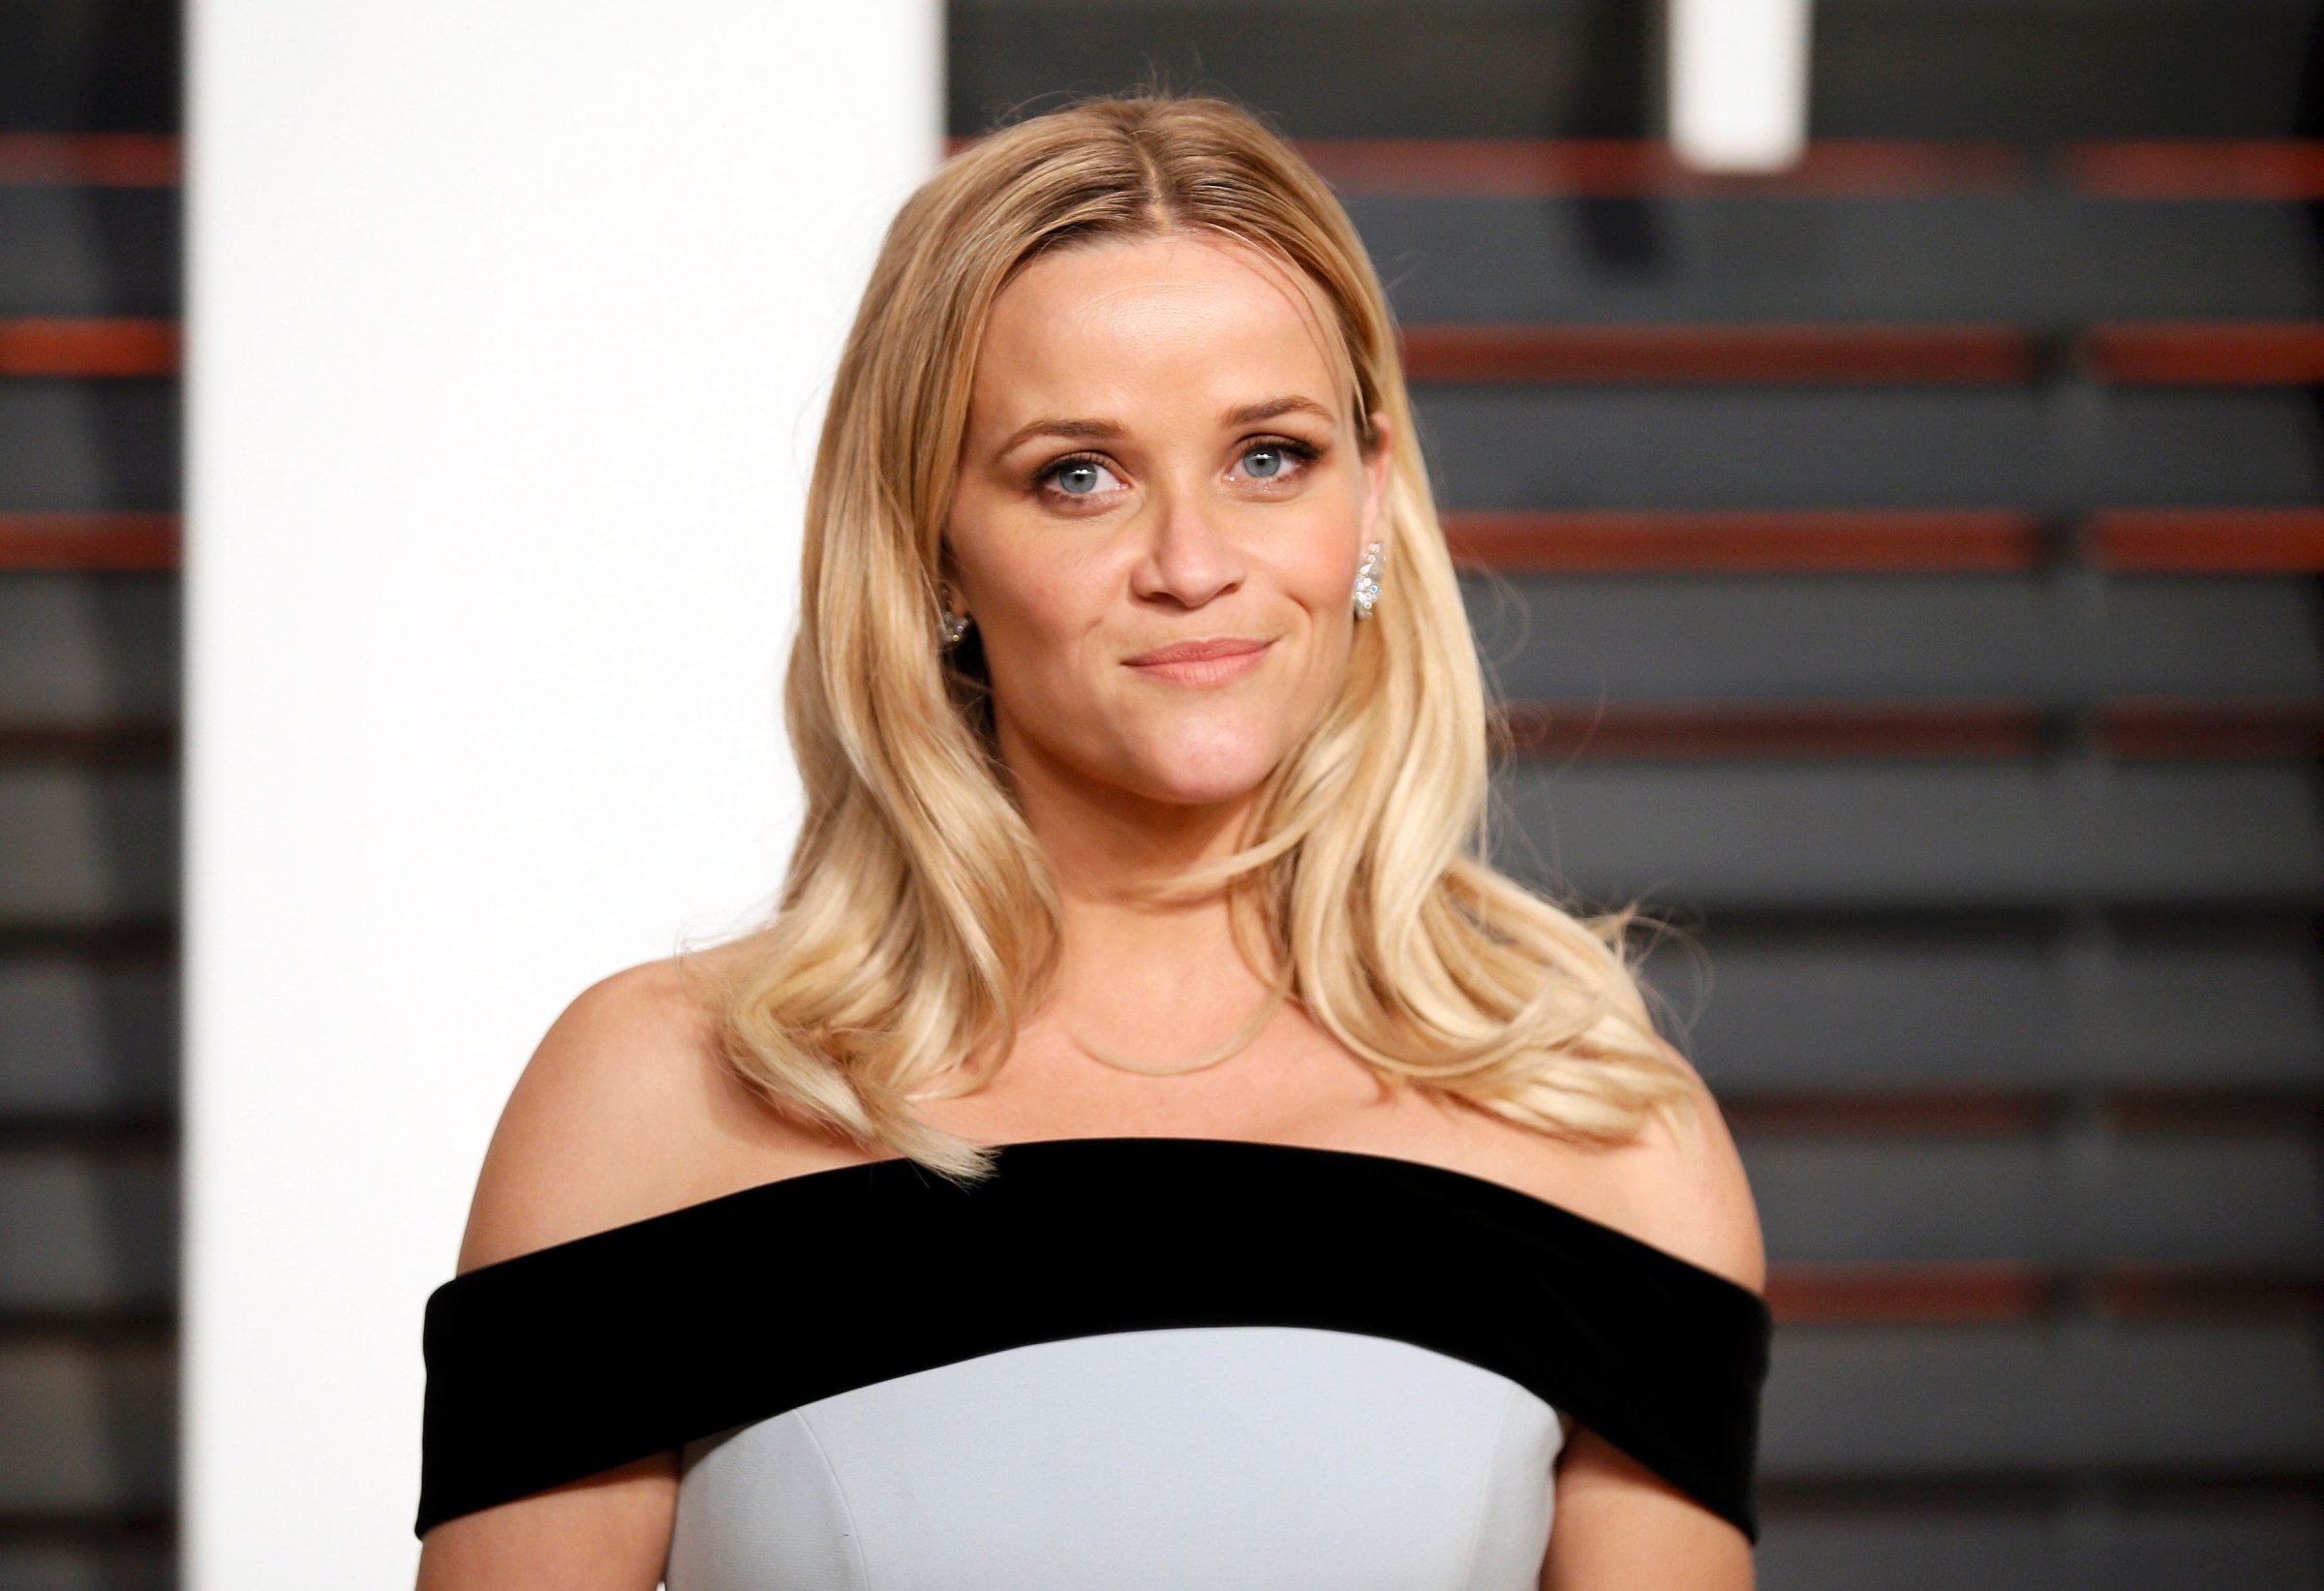 Reese Witherspoon arrives at the 2015 Vanity Fair Oscar Party in Beverly Hills